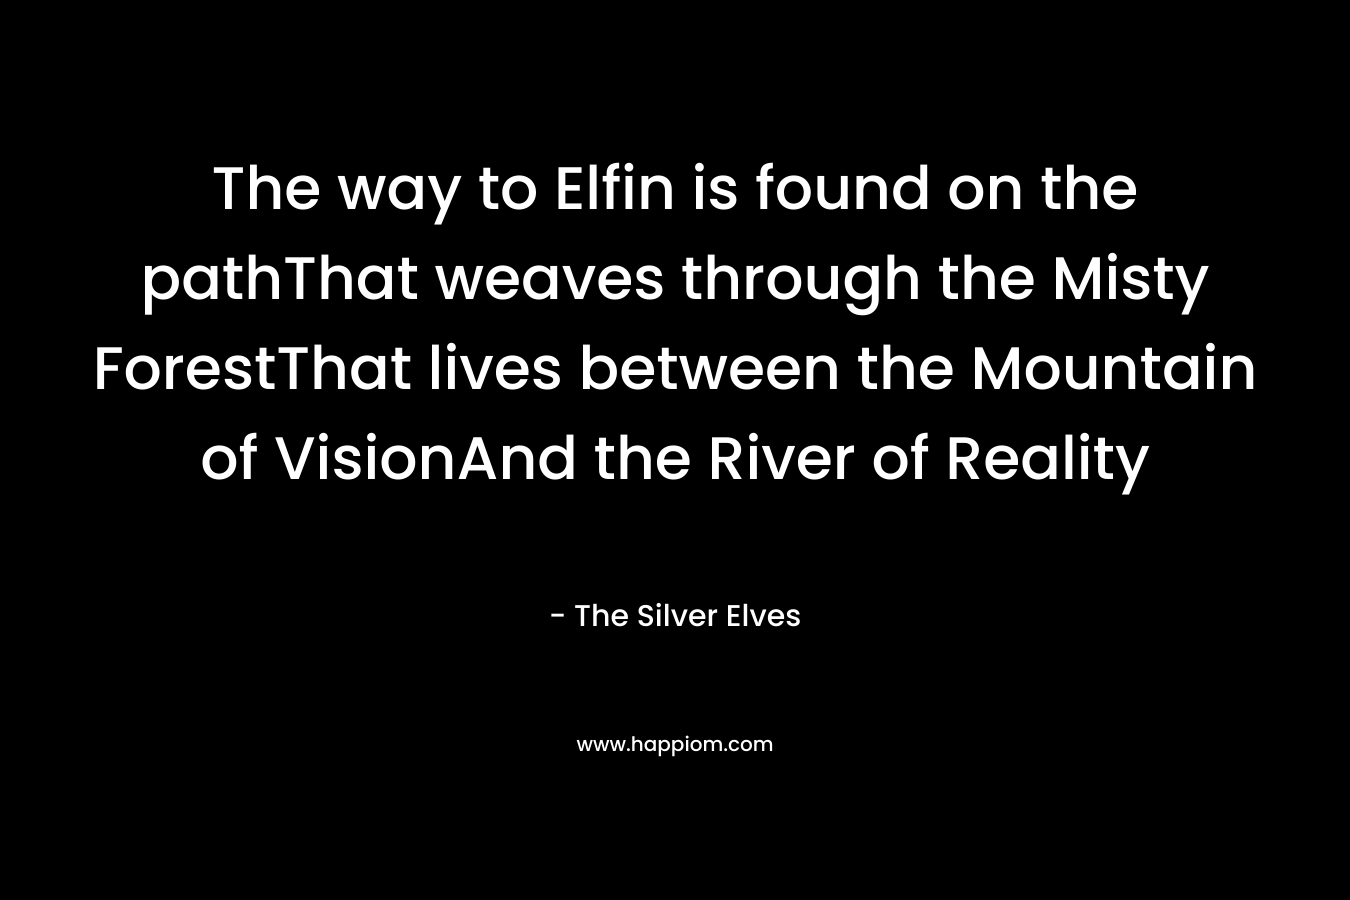 The way to Elfin is found on the pathThat weaves through the Misty ForestThat lives between the Mountain of VisionAnd the River of Reality – The Silver Elves